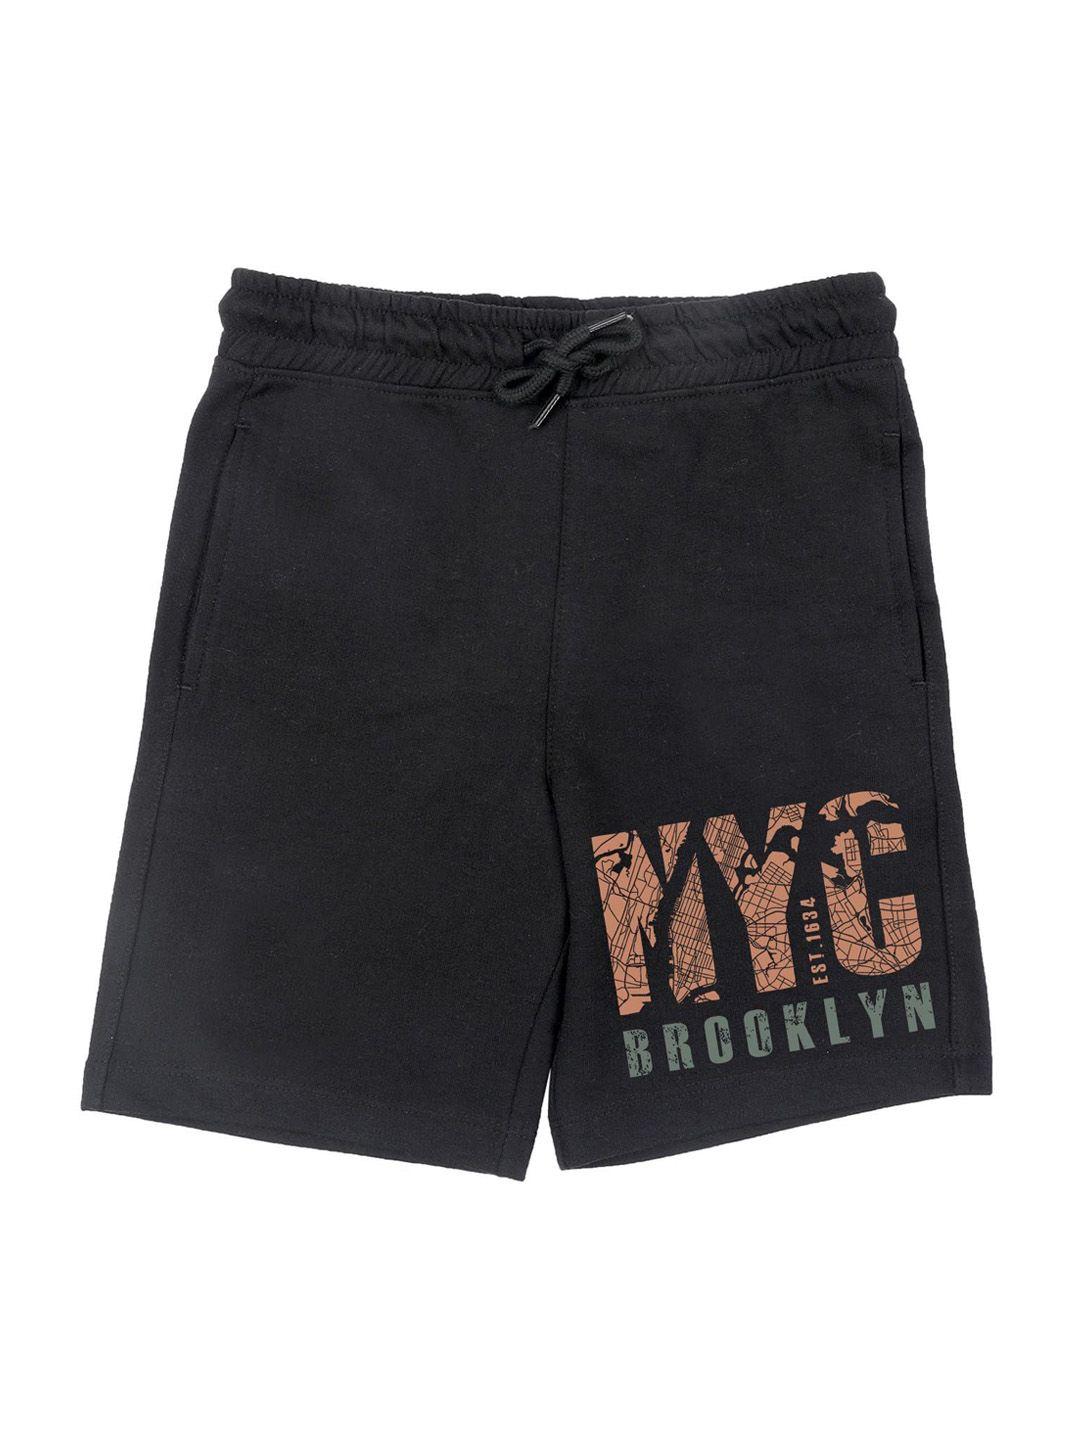 wear your mind boys black typography printed shorts